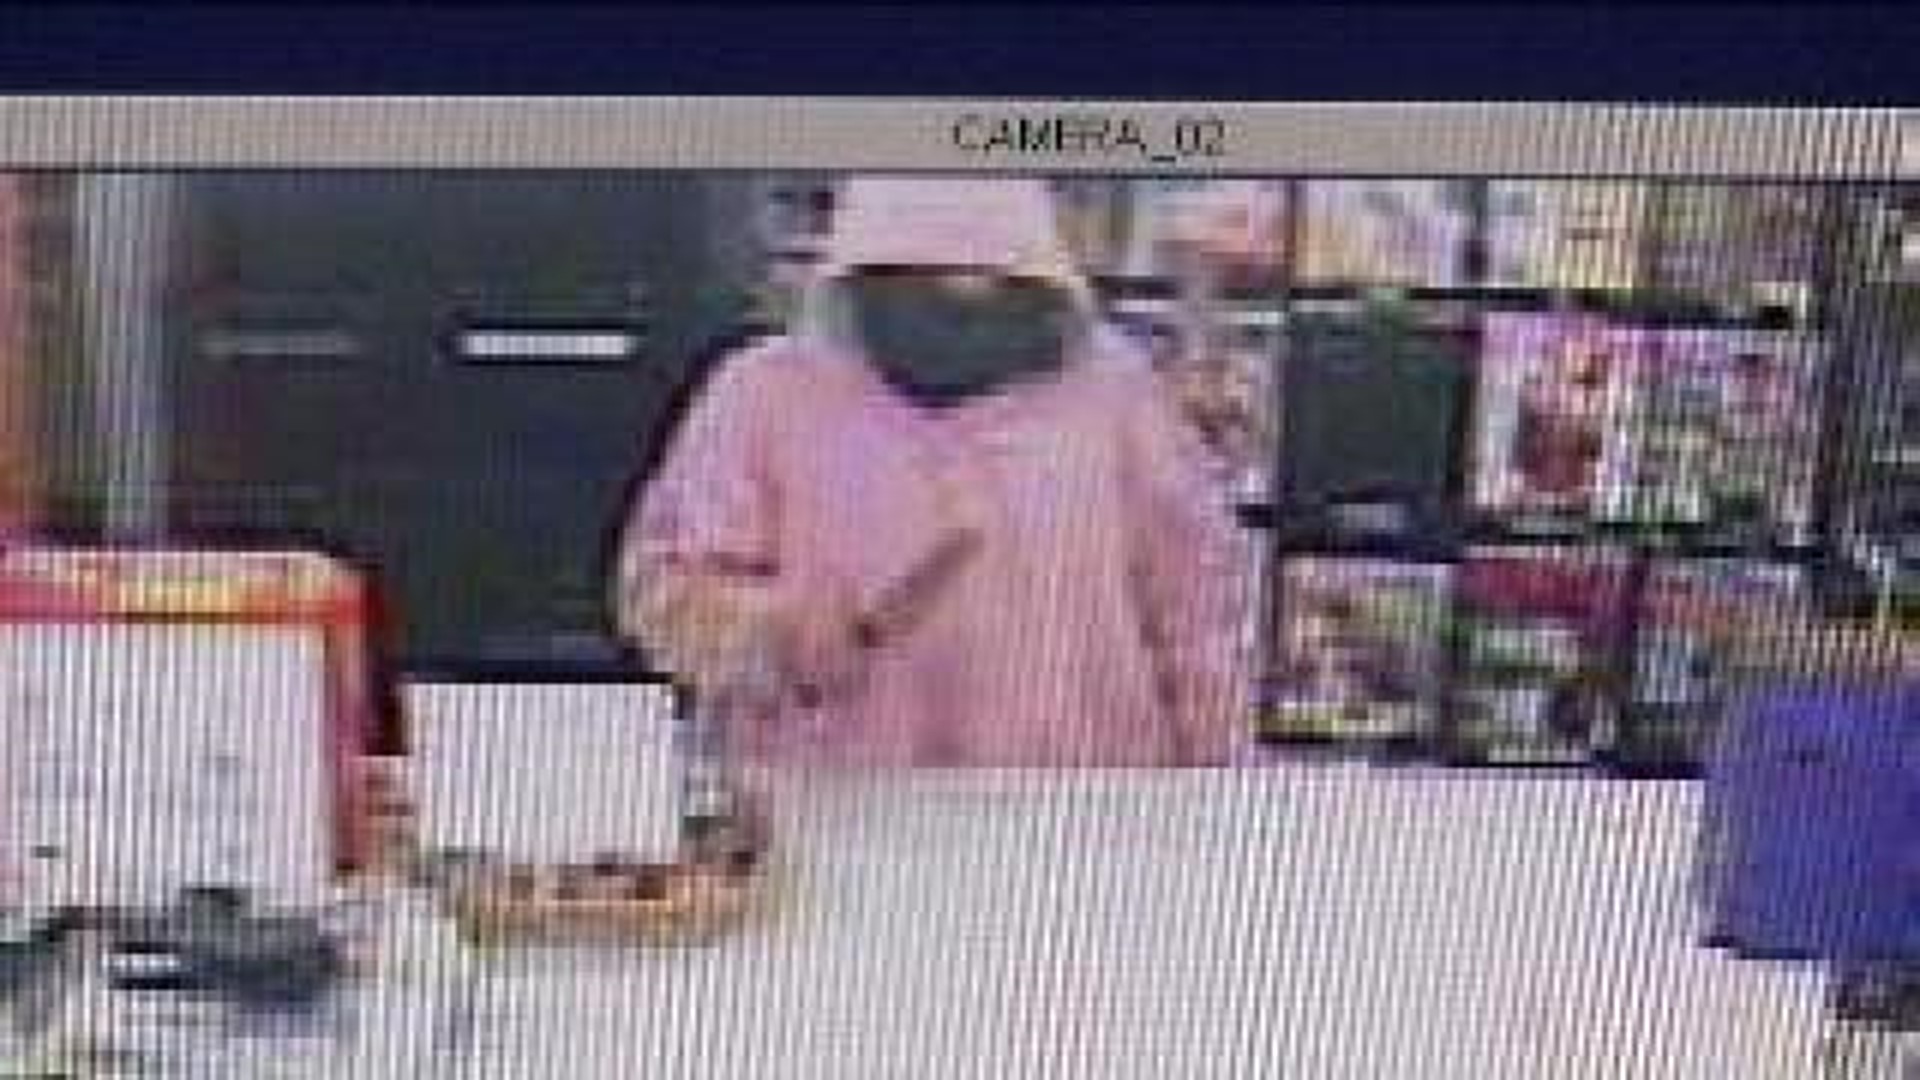 Armed Woman Attempted to Rob Store